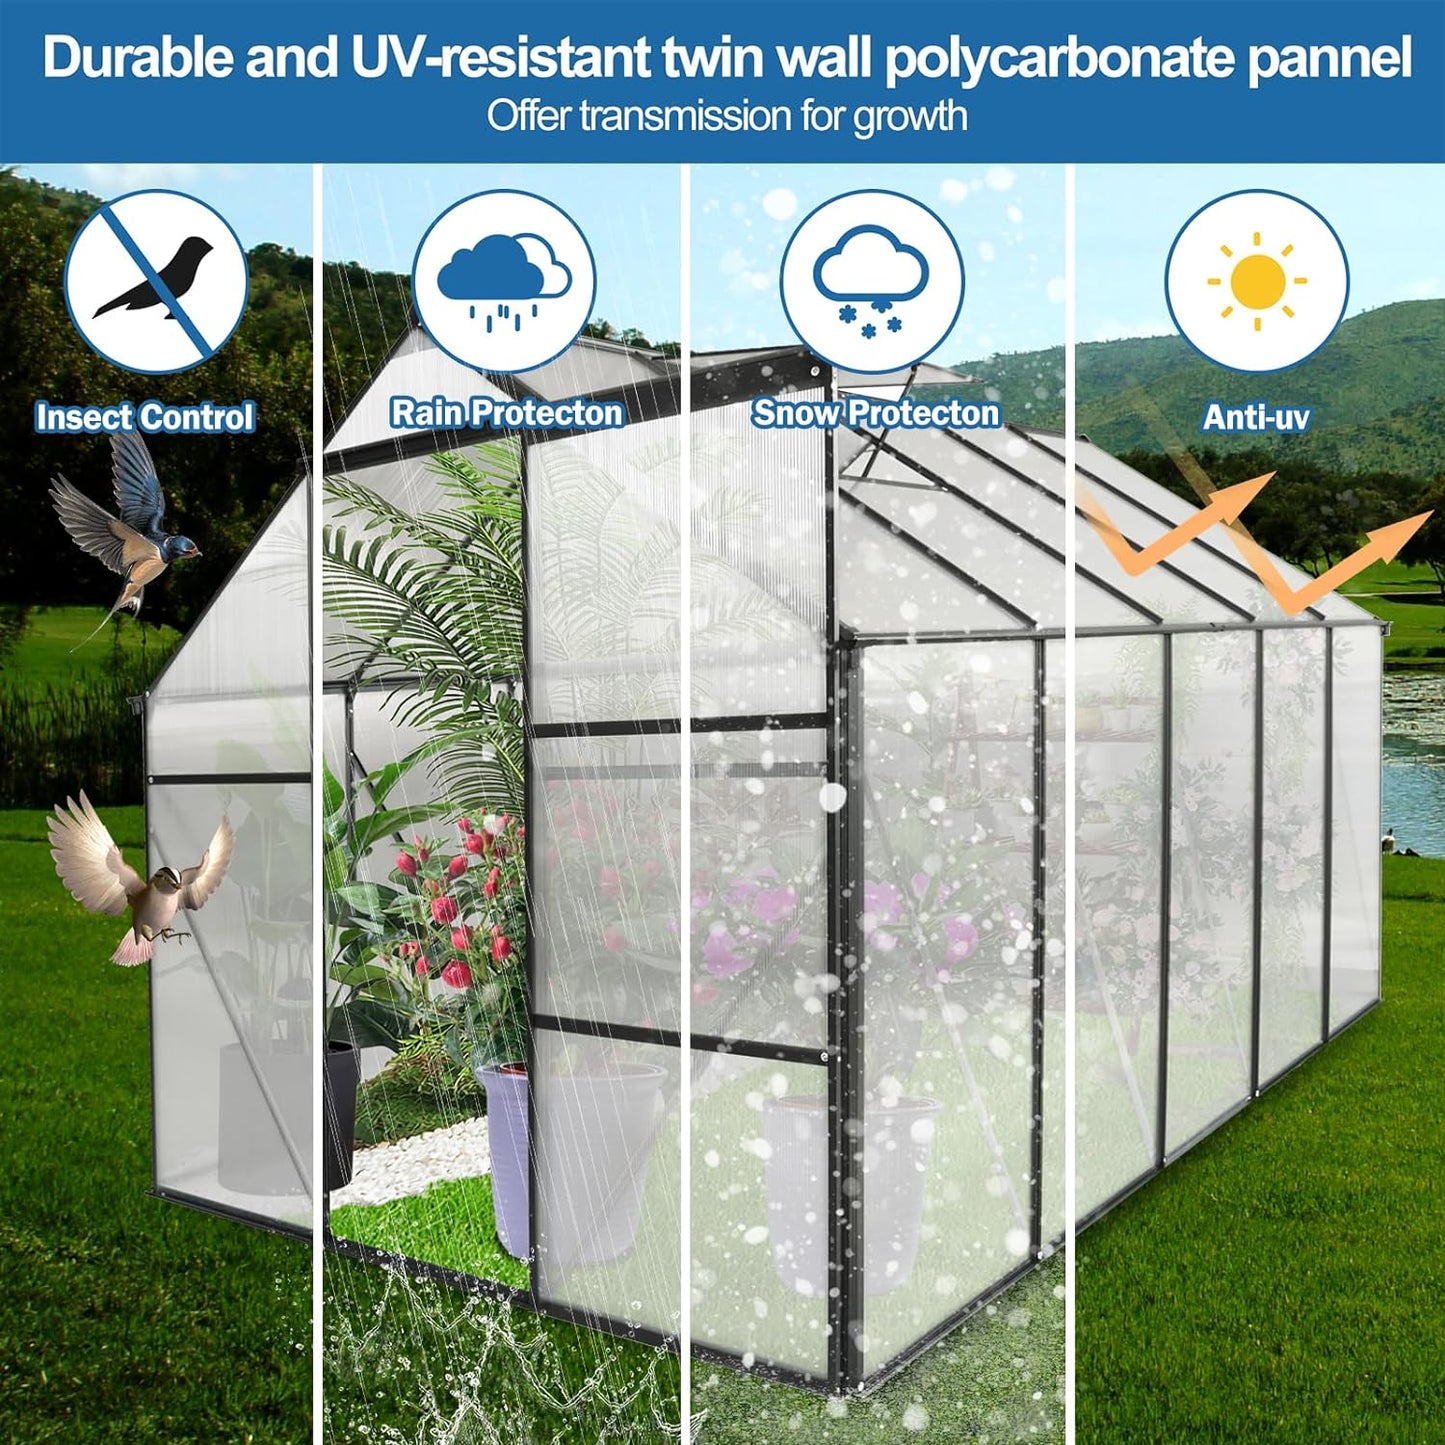 6X10 FT Polycarbonate Walk in Greenhouse, Green House with Adjustable Roof and Sliding Door, up to 70% Light Transmission Panels & Drainage System, for Outdoors Indoor outside Heavy Duty, Black - Design By Technique